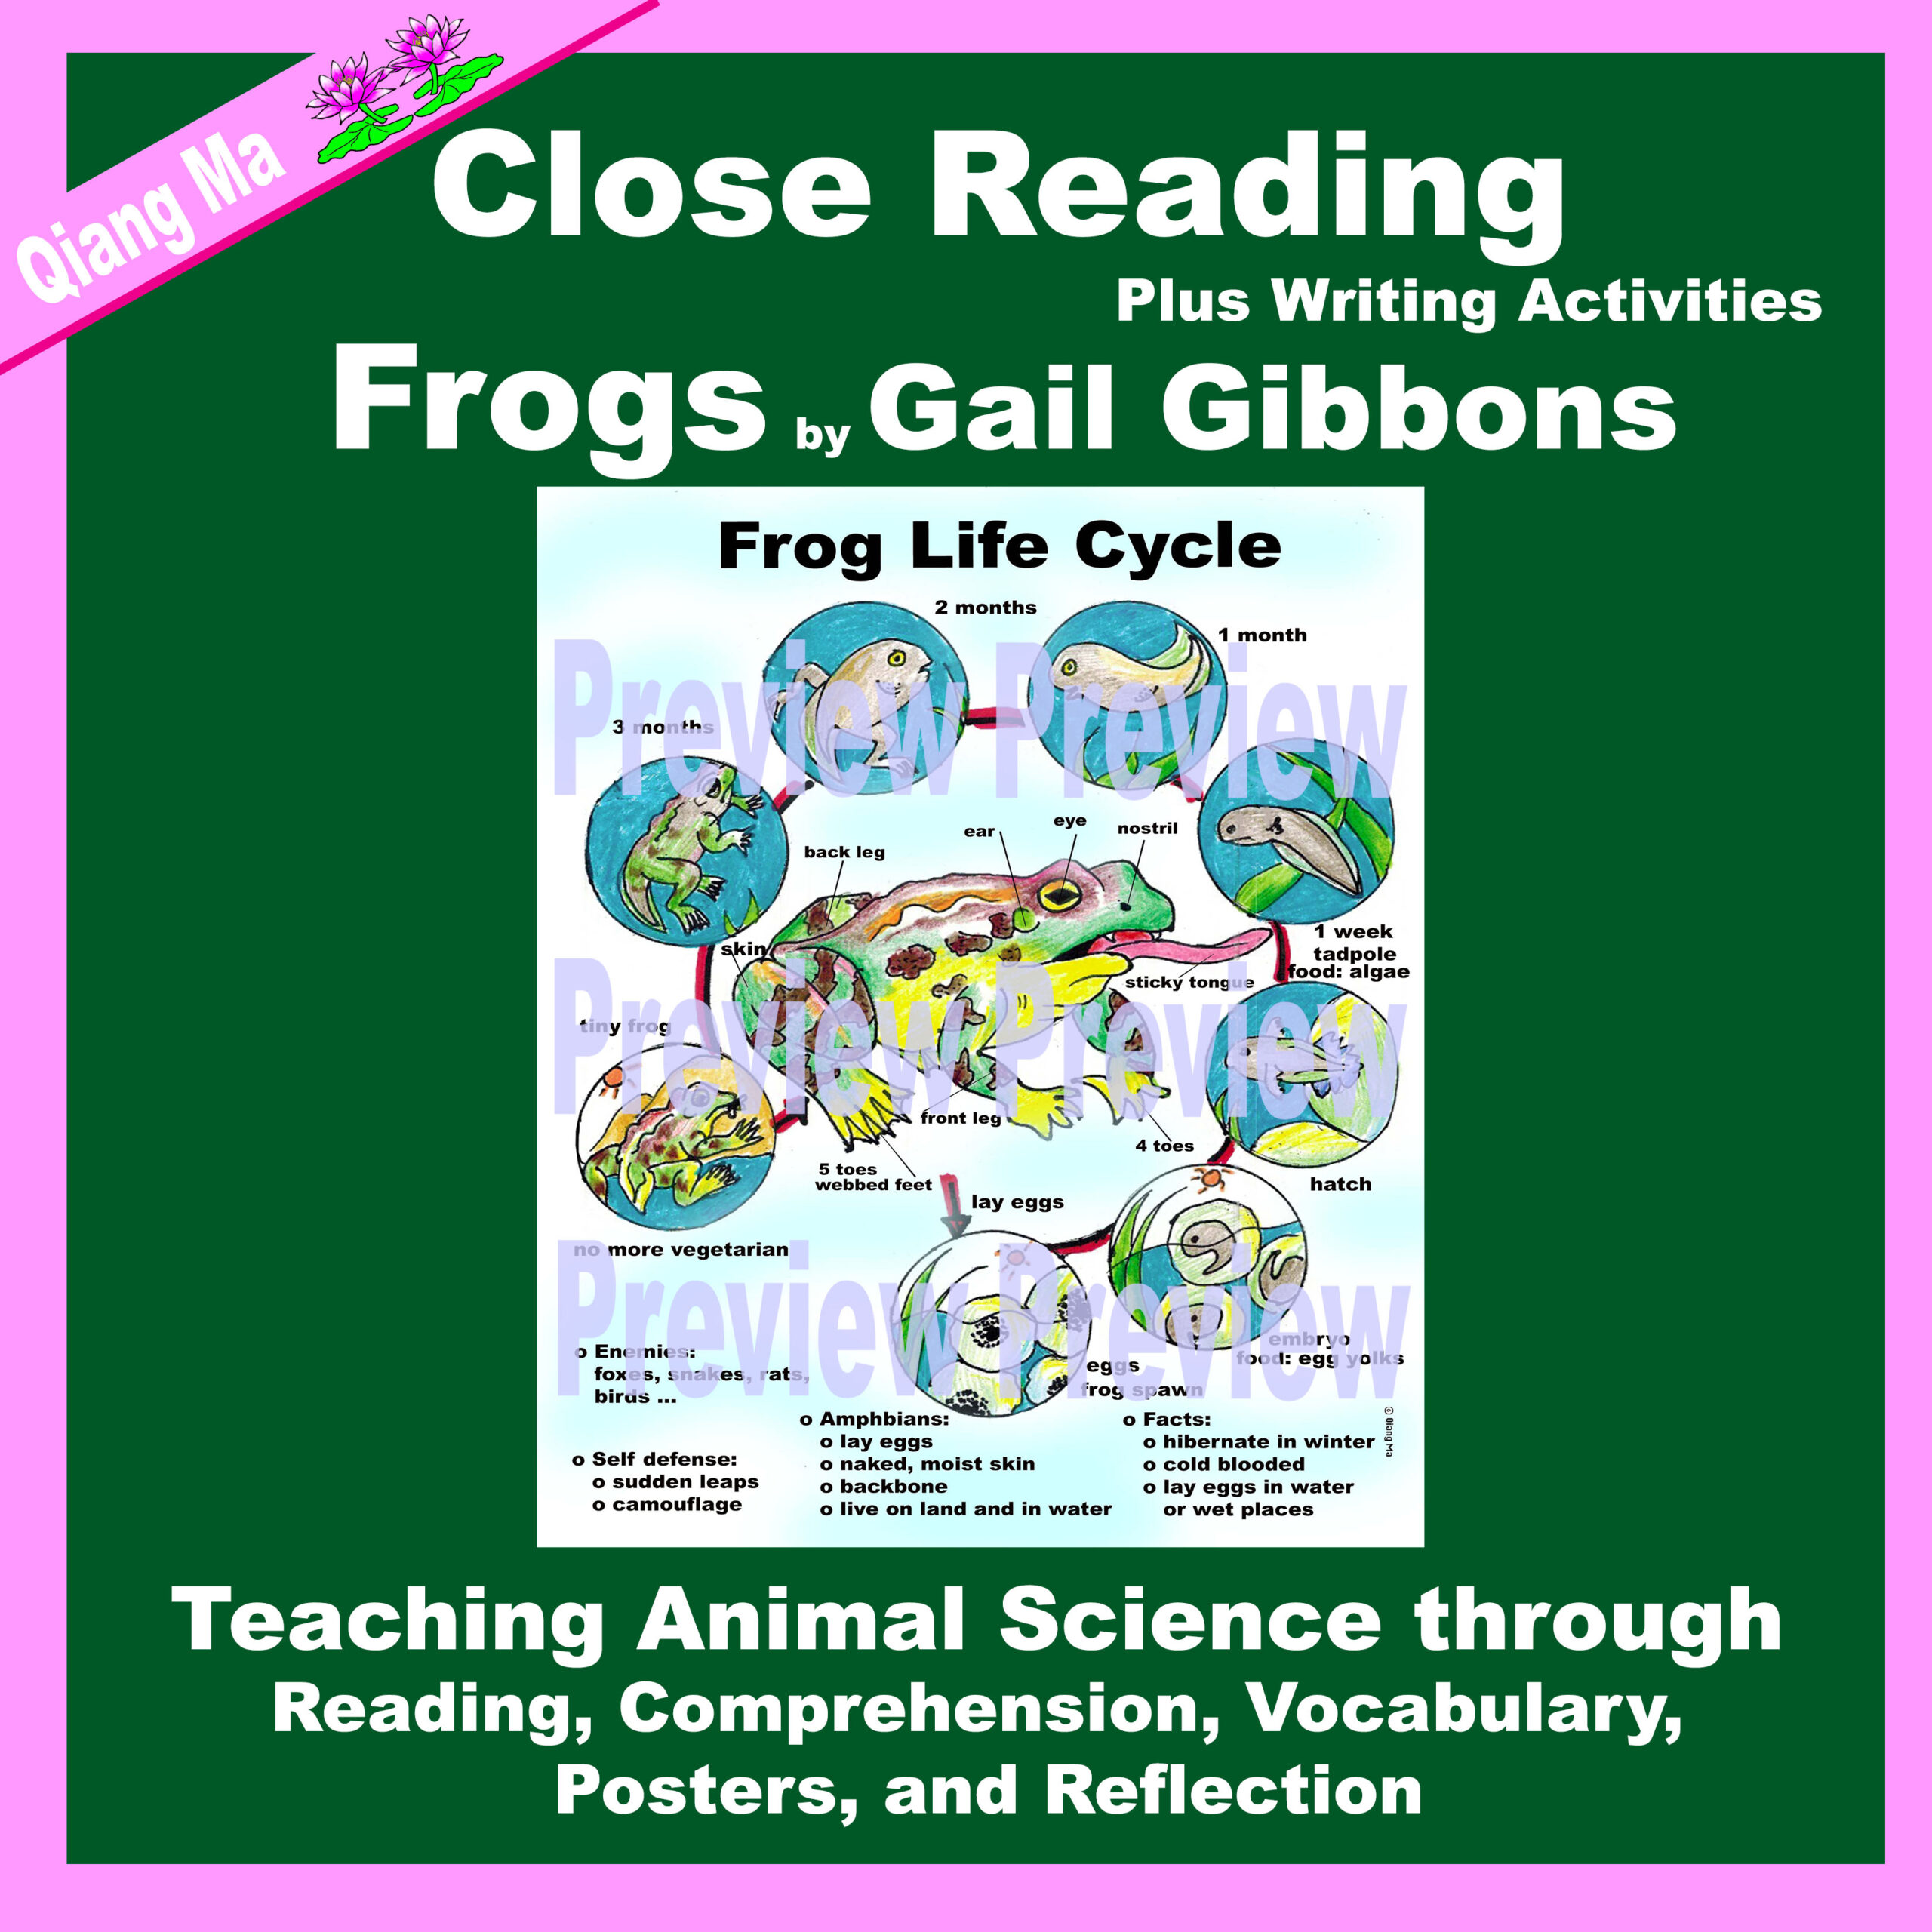 Close Reading: Frogs by Gail Gibbons